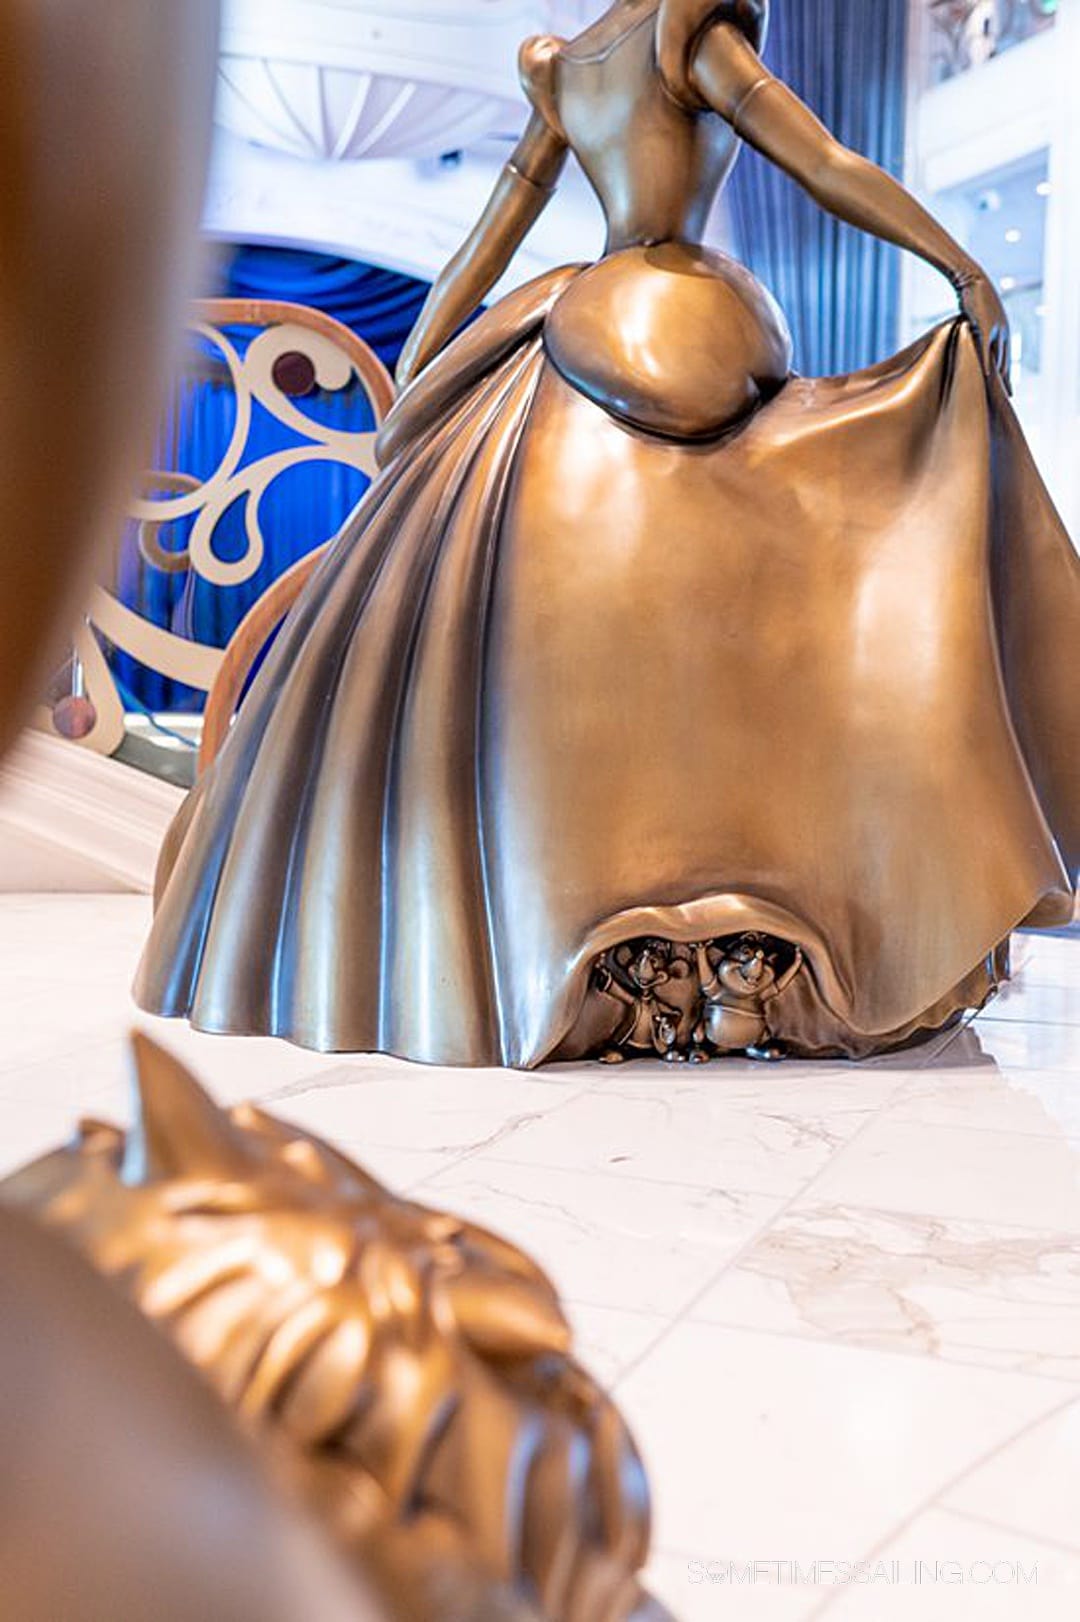 Bronze Gus and Jacque mice peeking out from Cinderella's gown on Disney Wish cruise ship in the Grand Hall.